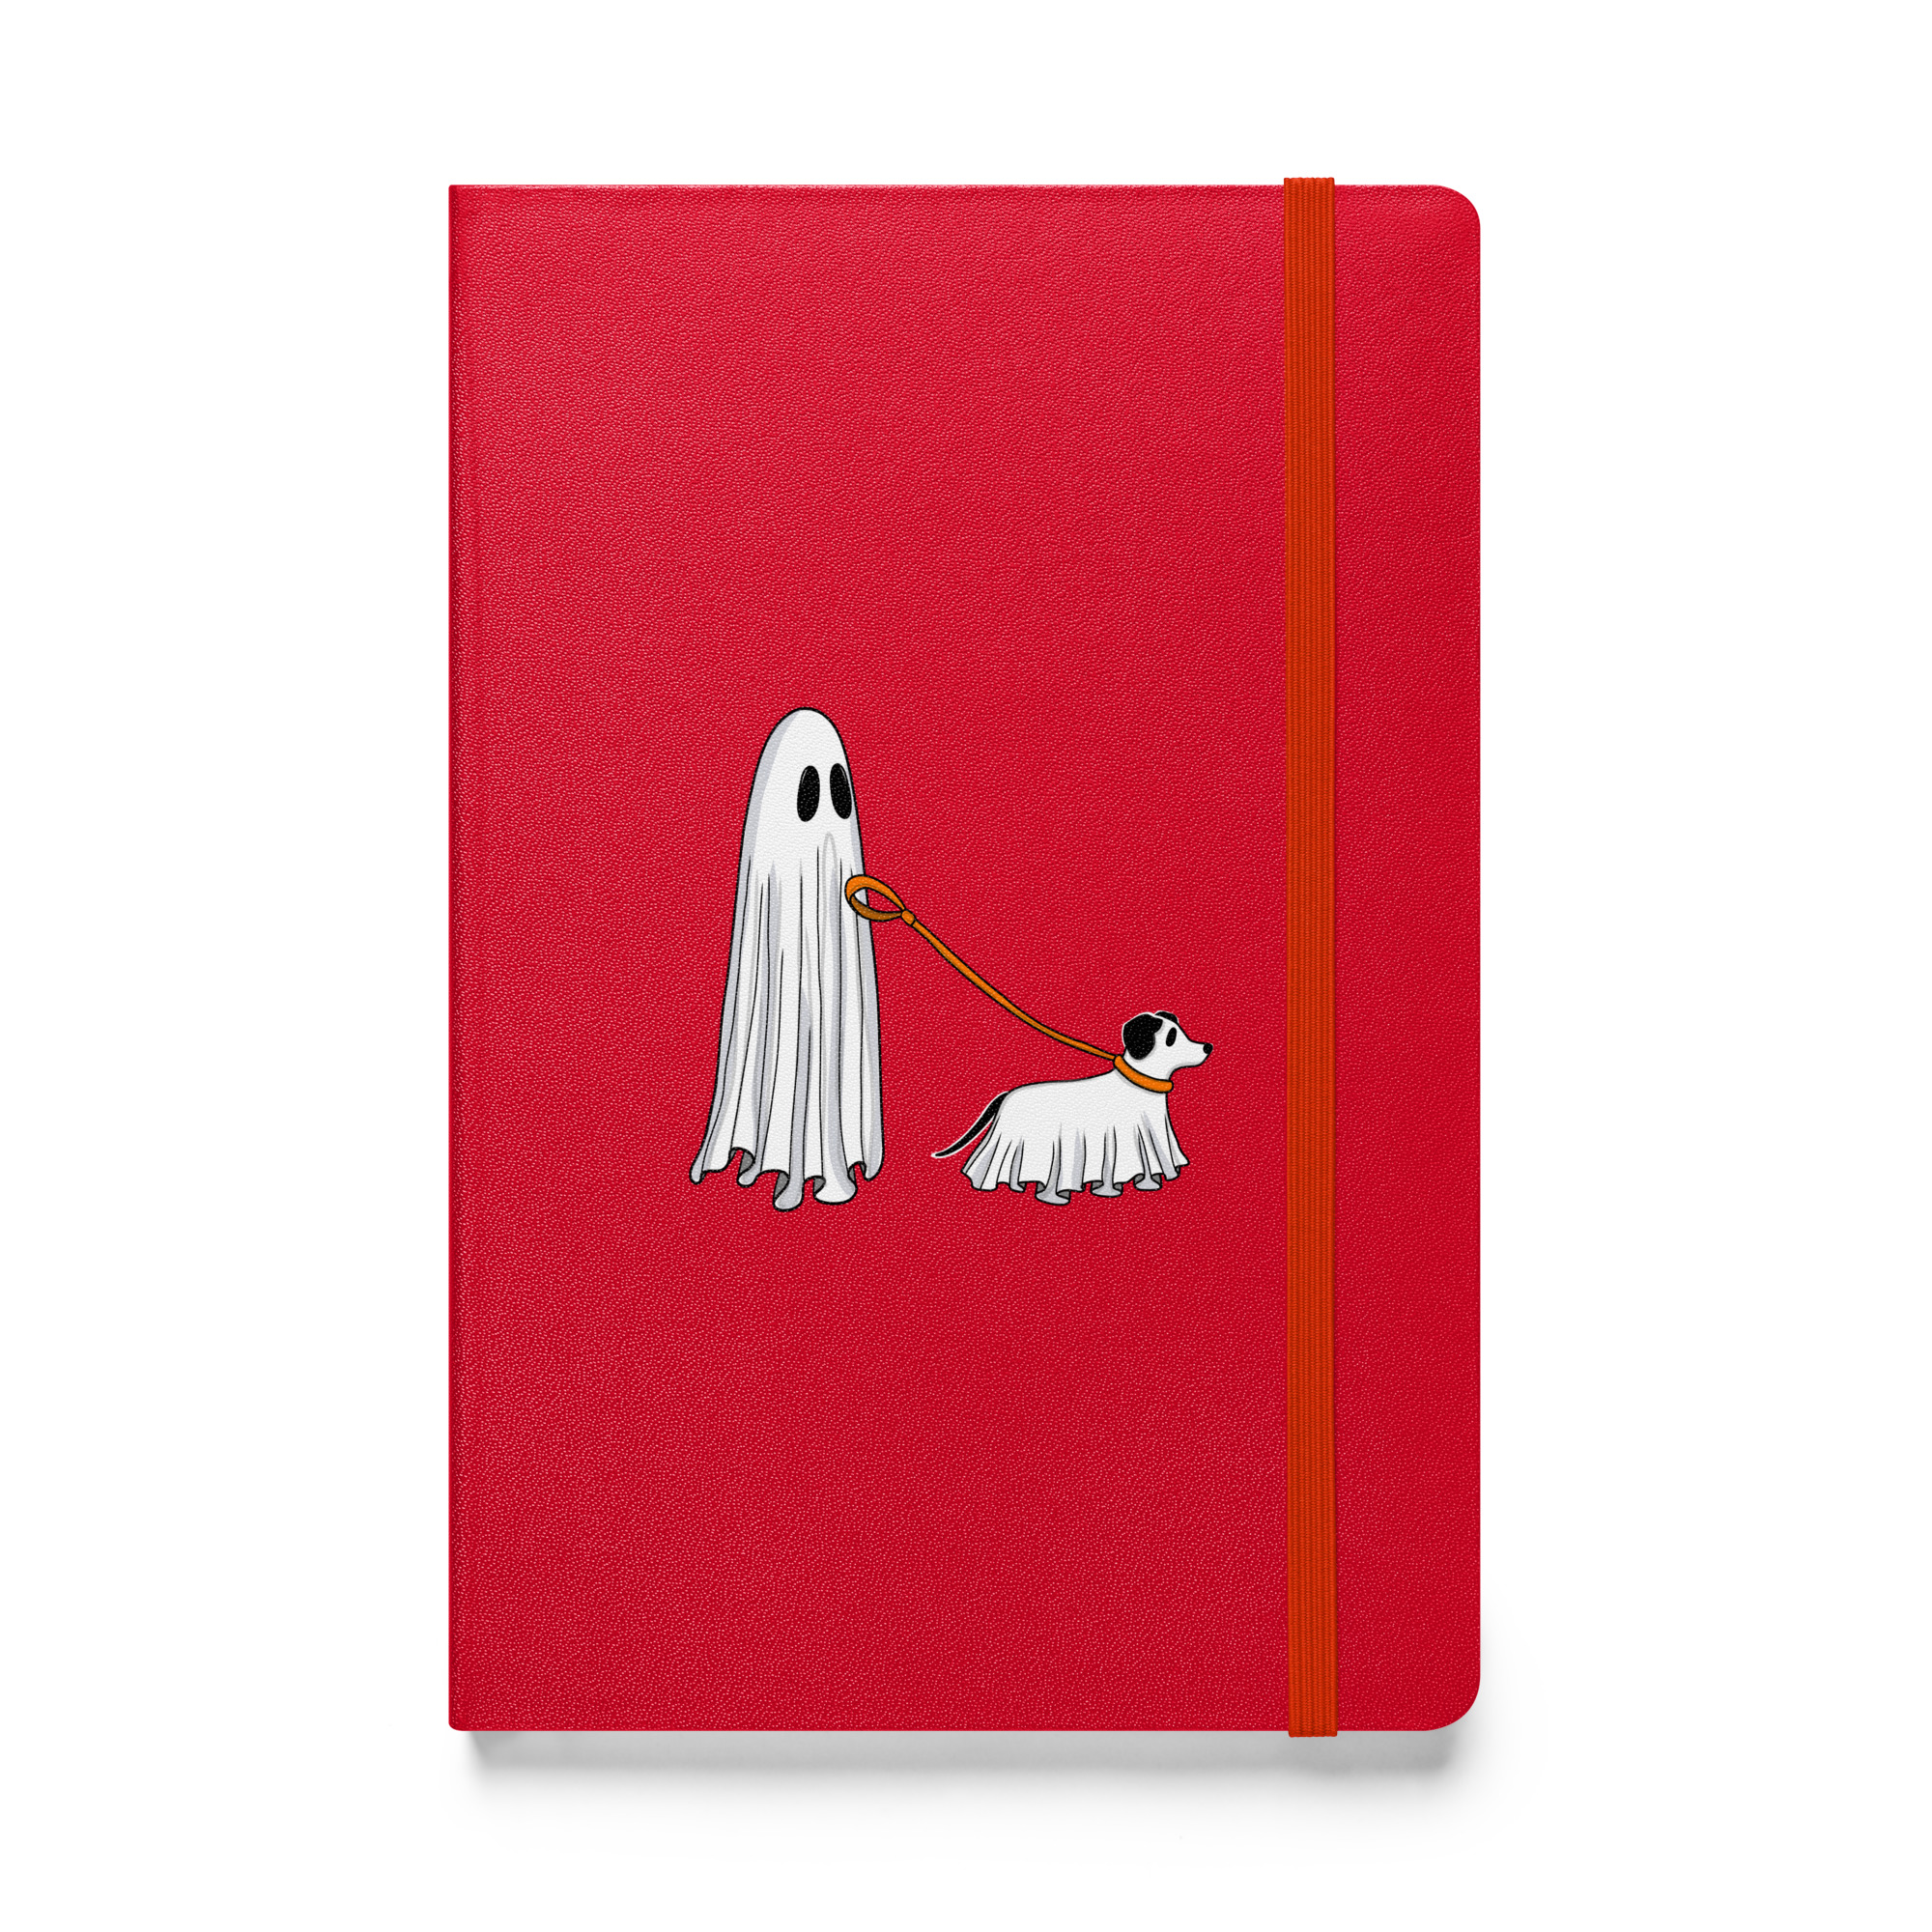 hardcover-bound-notebook-red-front-6537e81e30a7a.jpg